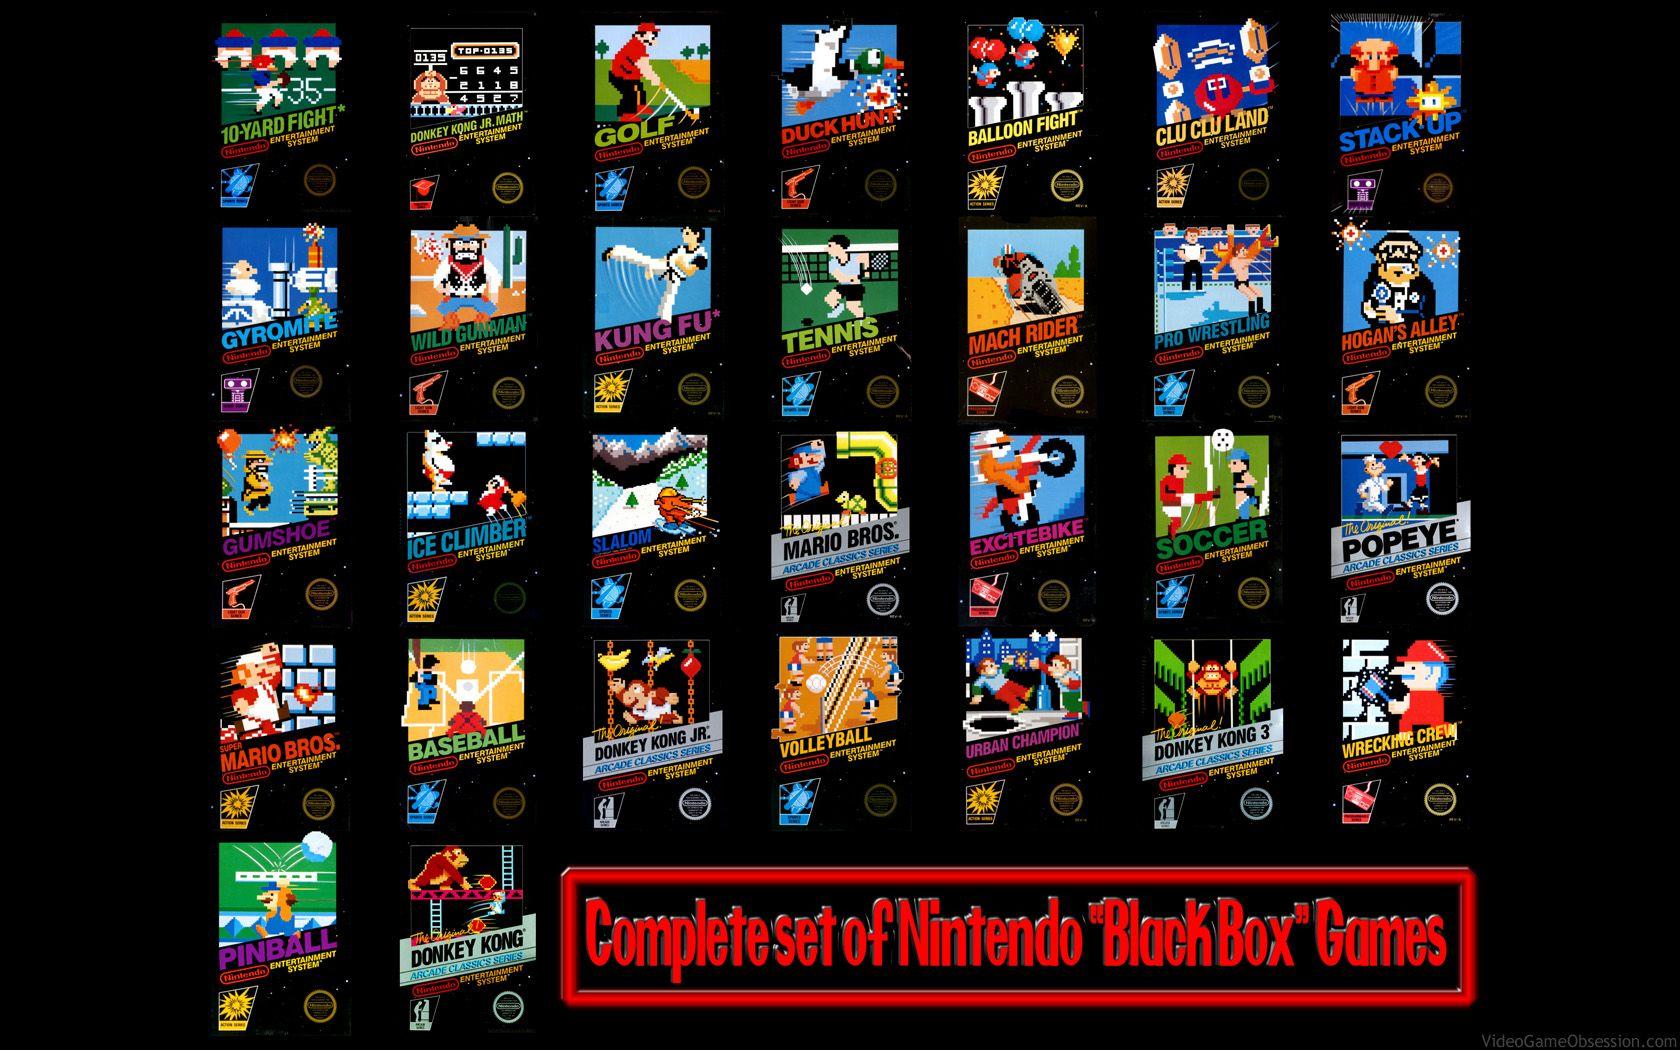 Video Game Wallpaper Video Game Obsession 1996-[present]